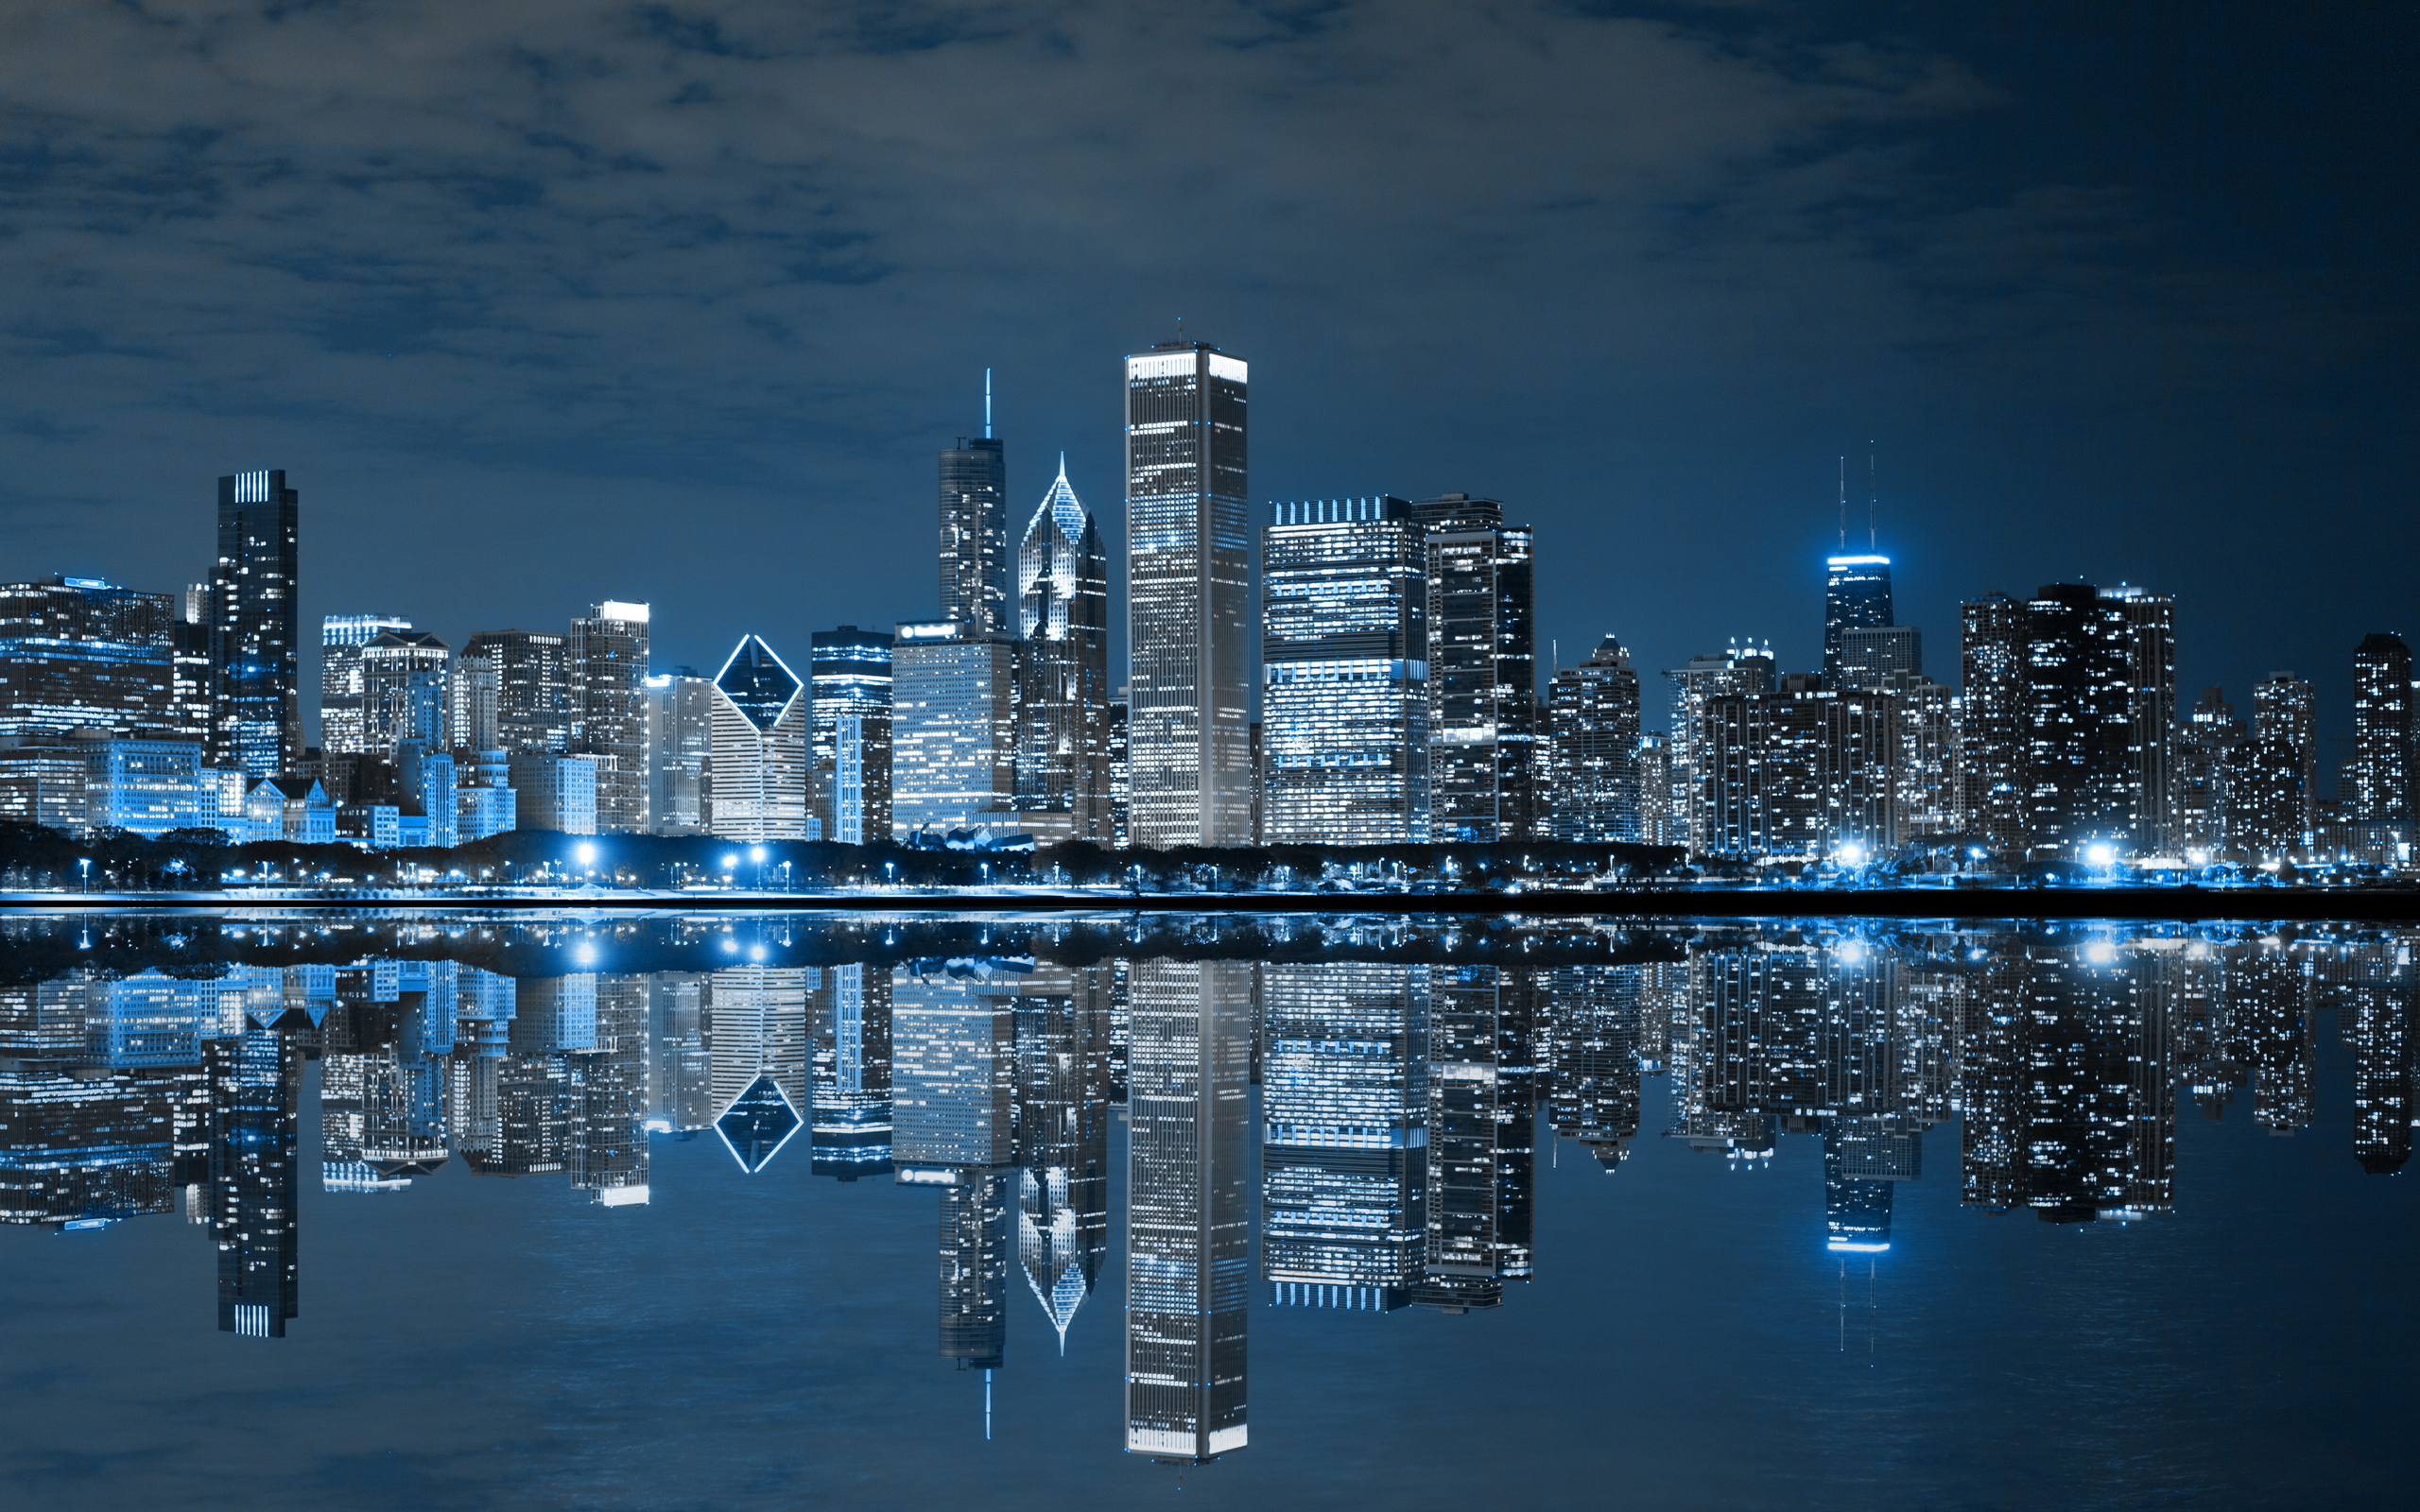 Chicago Night Reflection Wallpaper PC Wallpaper with 2560x1600 2560x1600